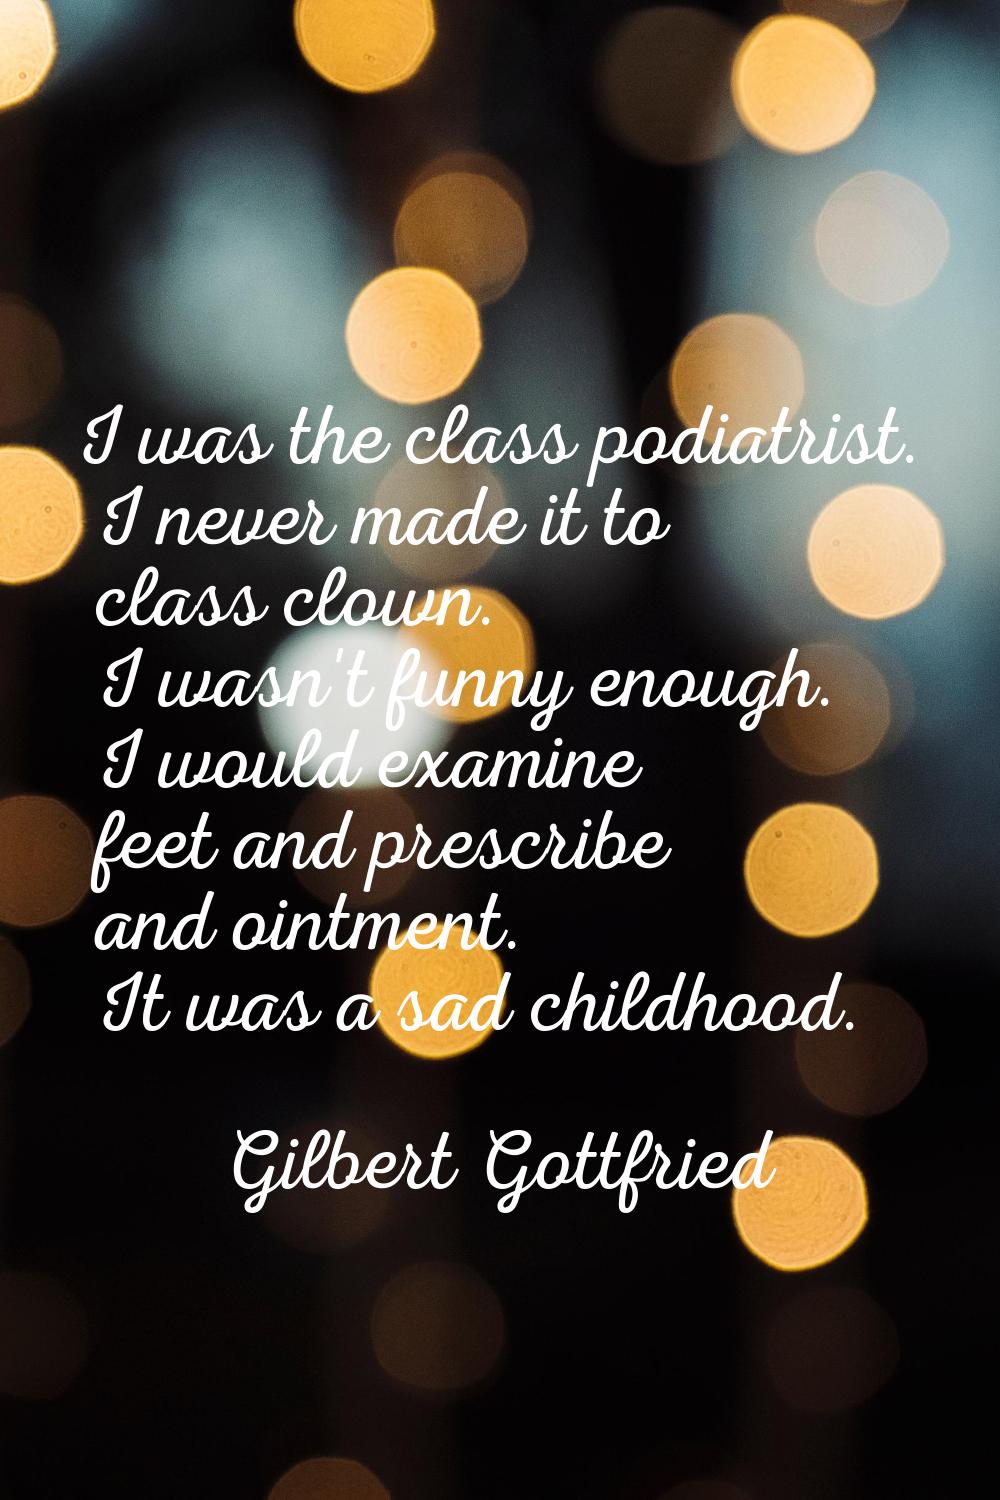 I was the class podiatrist. I never made it to class clown. I wasn't funny enough. I would examine 